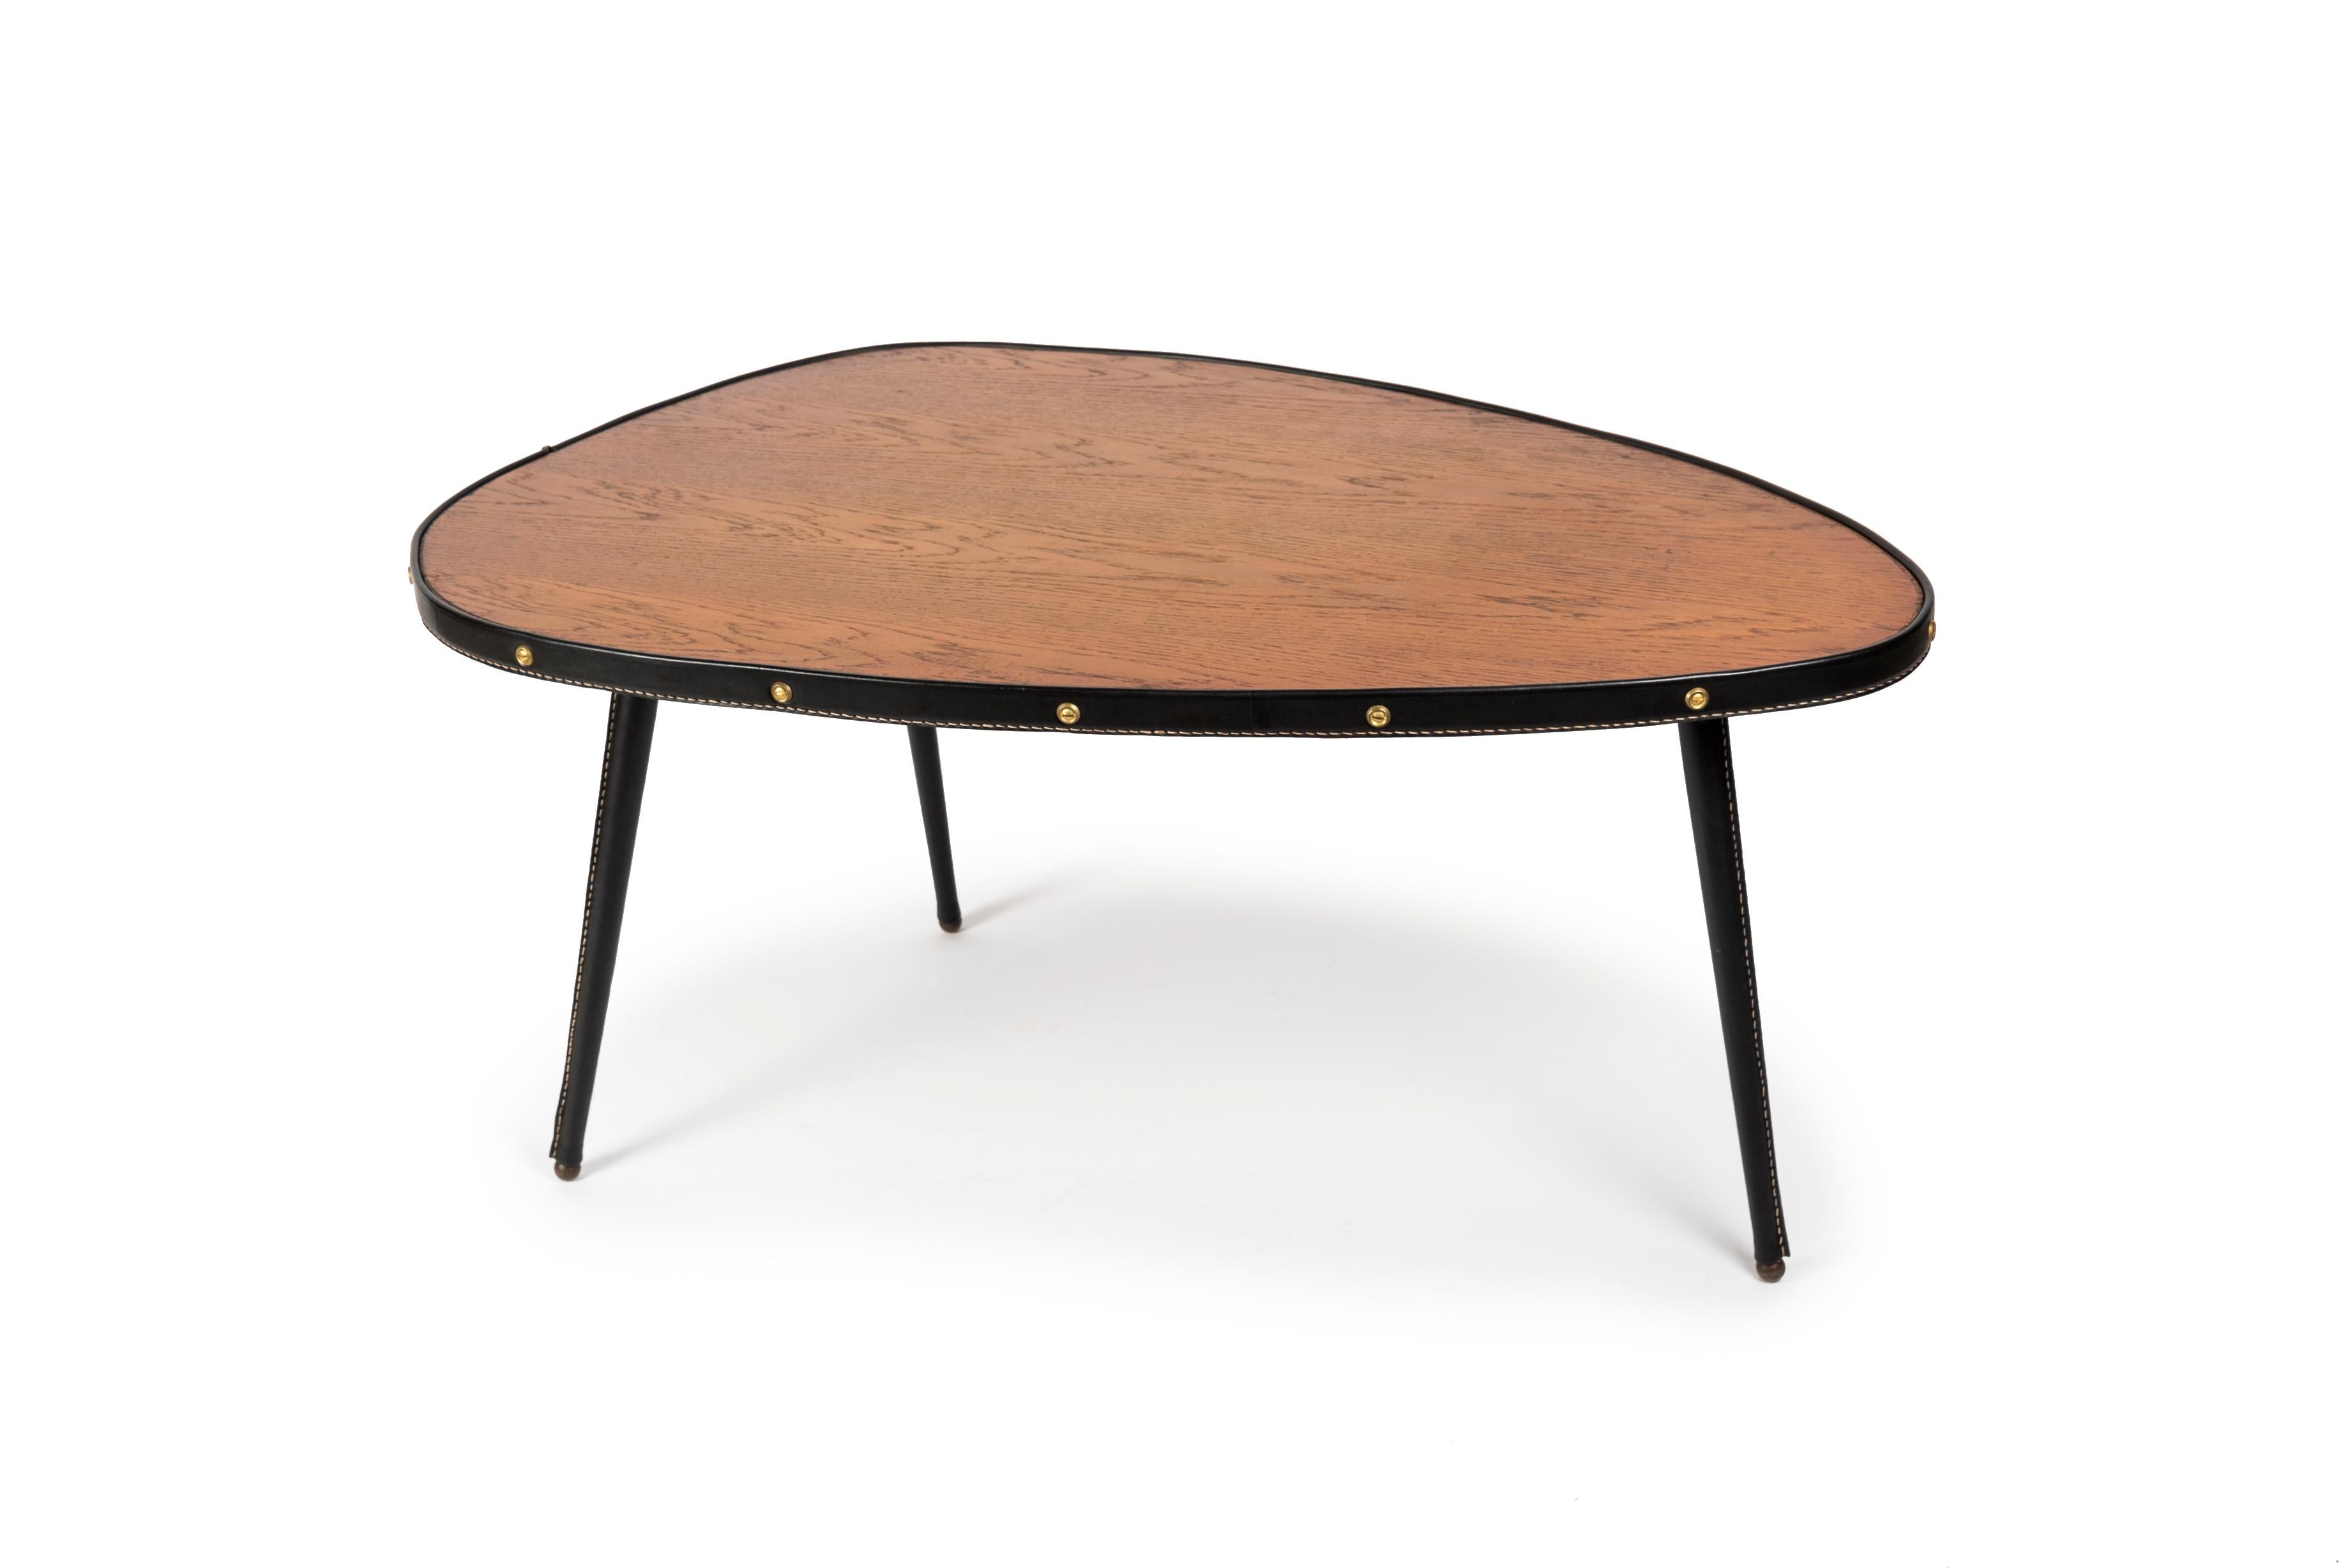 1950's Stitched leather and oak cocktail table
Rare with this shape 
France